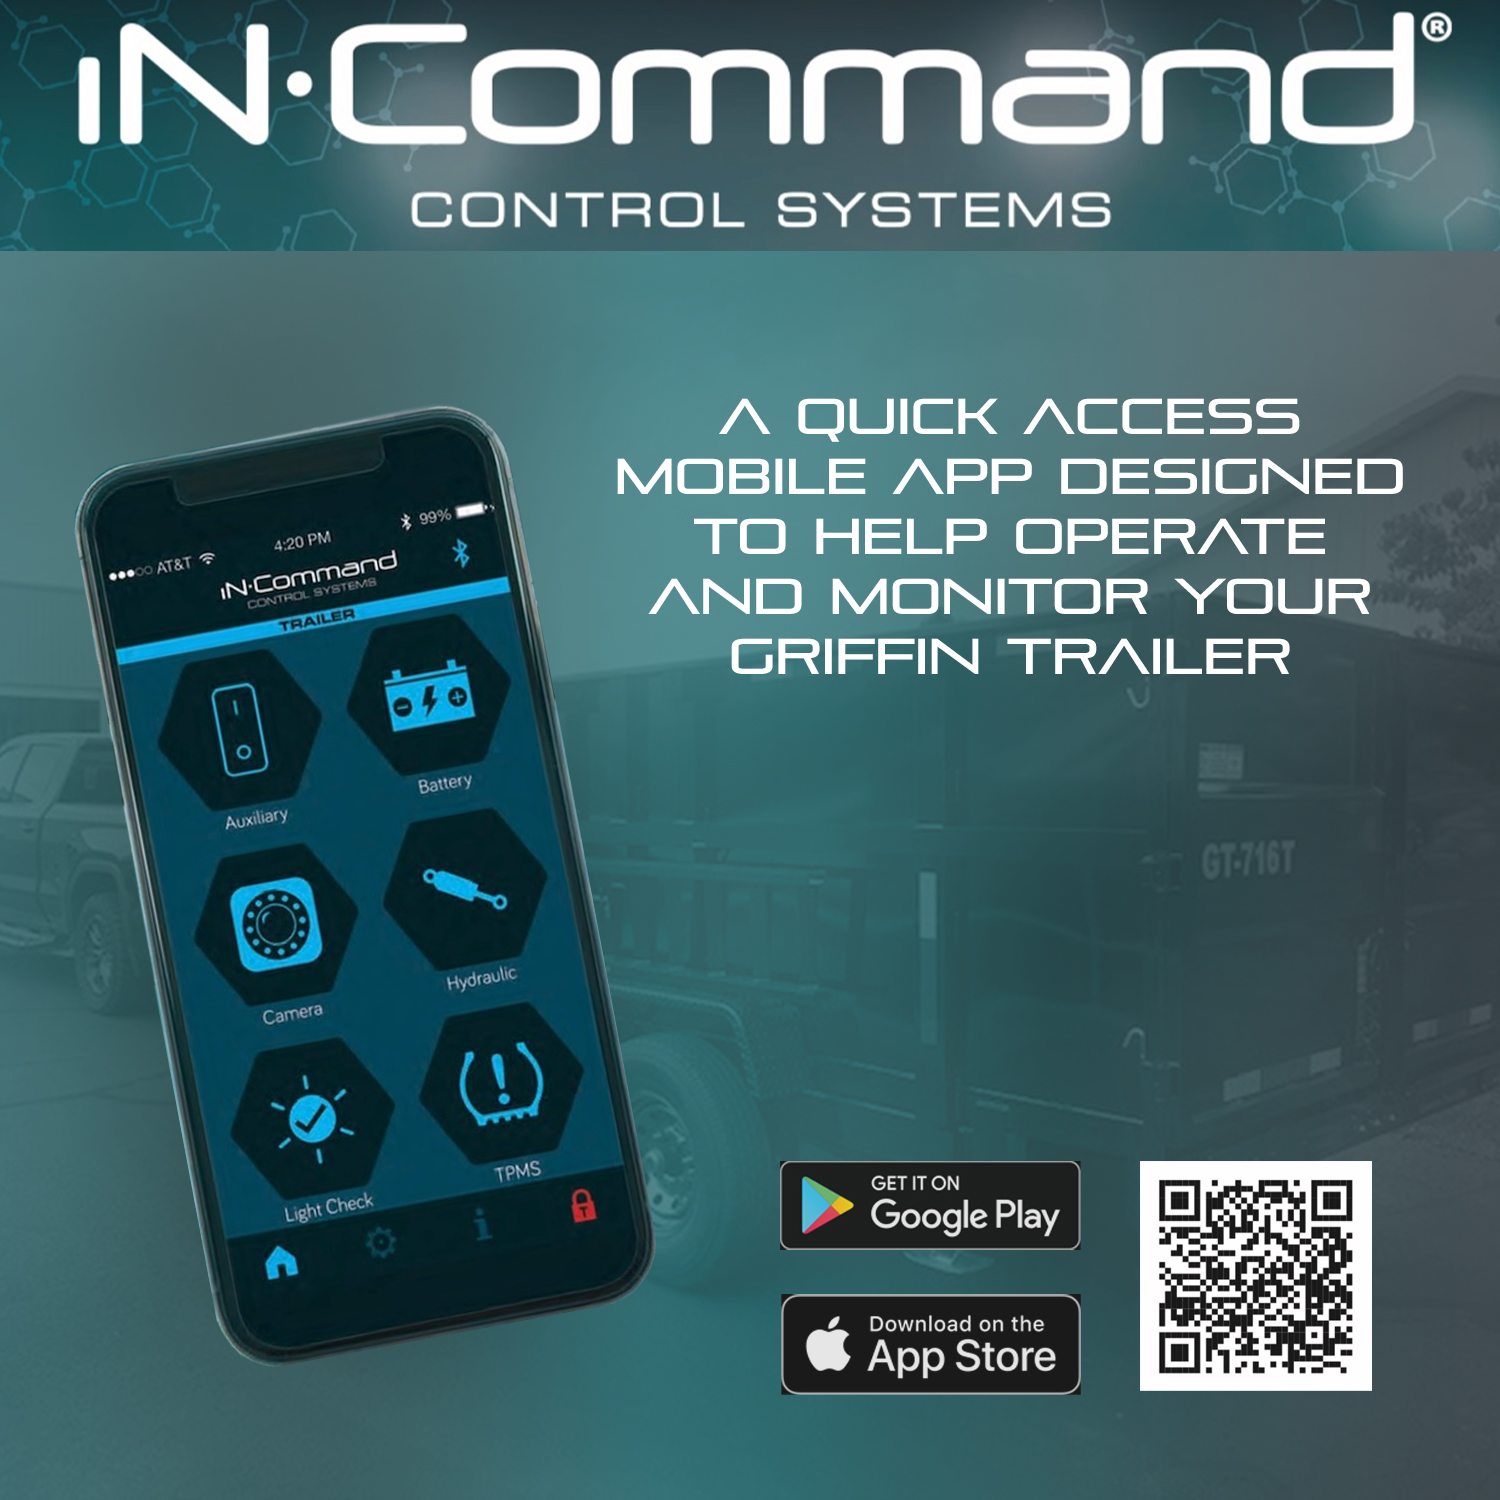 Griffin Trailer - iN•Command Control System